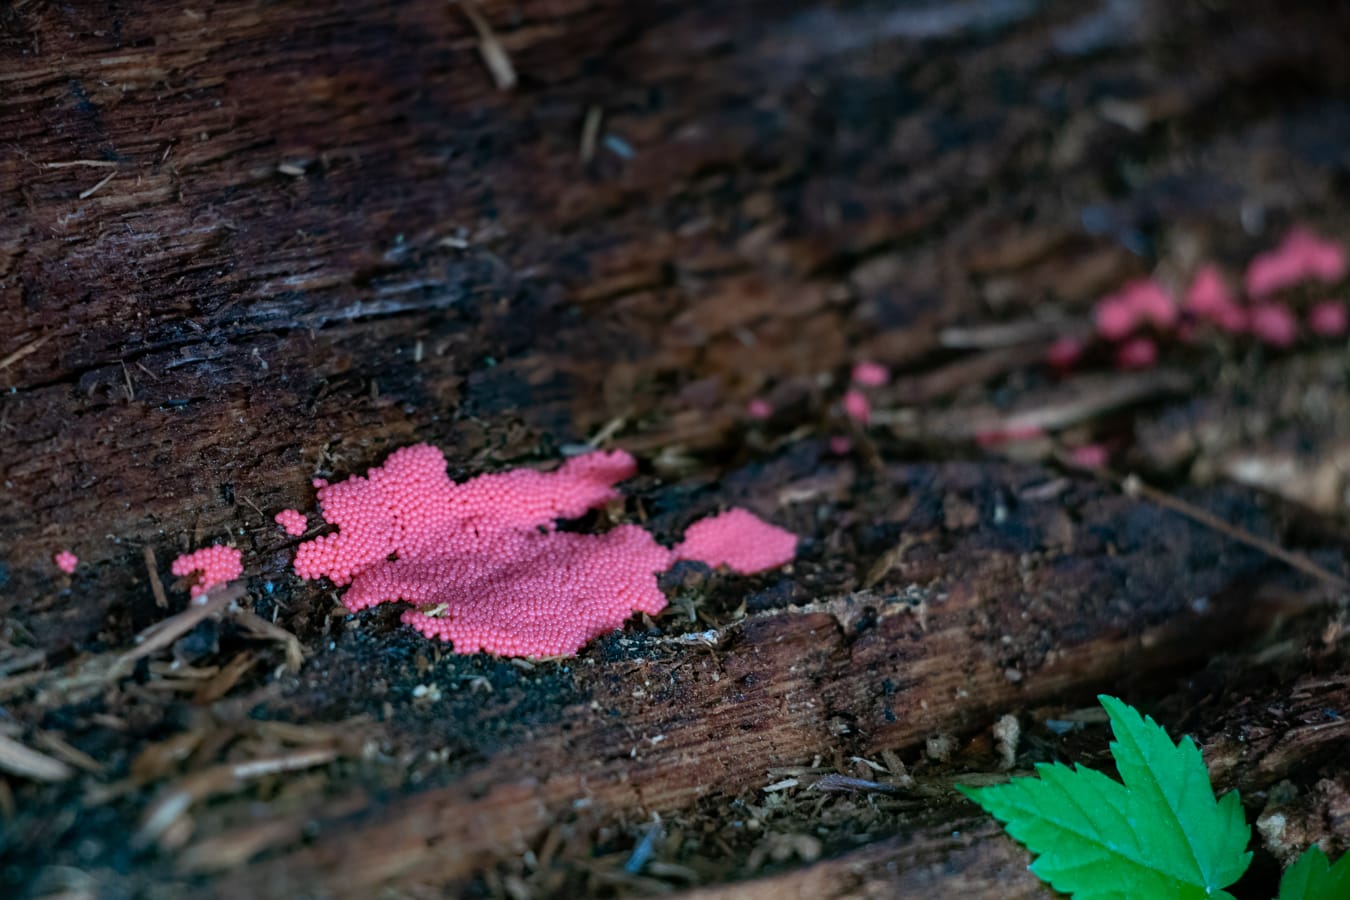 Tubifera ferruginosa in Cook Forest by FUNGIWOMAN